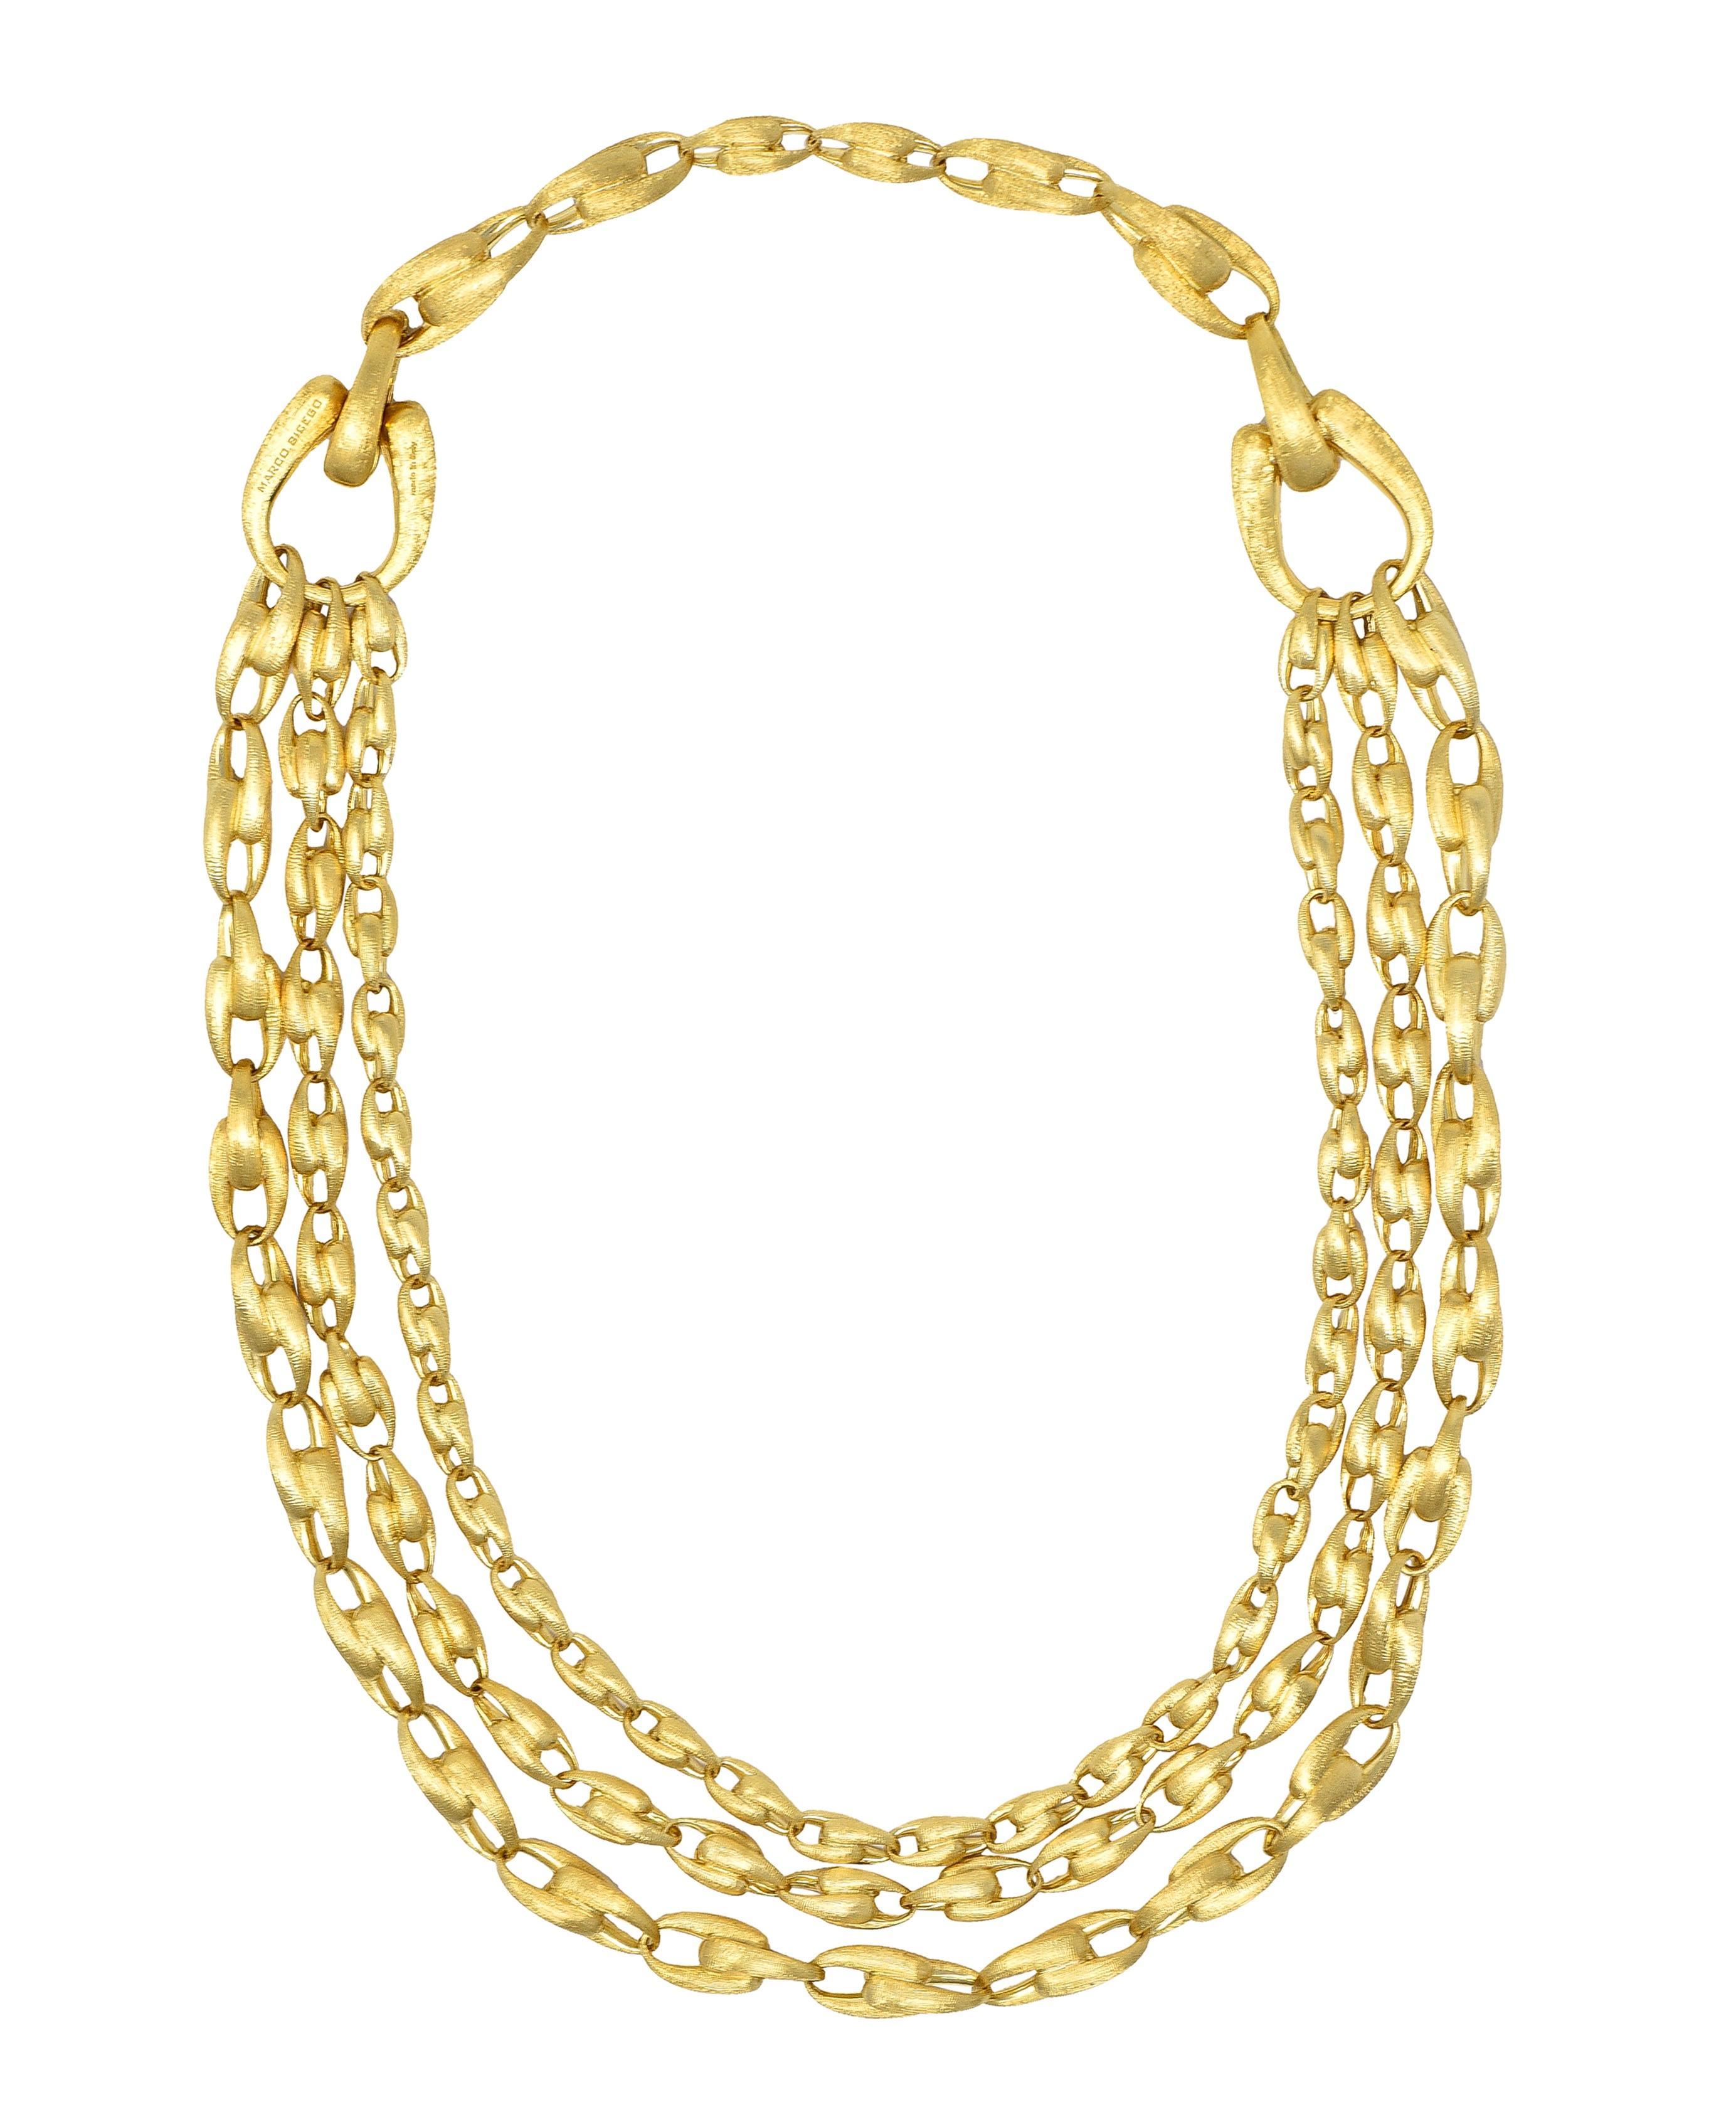 Comprised of tiered strands of graduated U-link chain with brushed gold texture throughout
Suspending from single chain and gathered at large U link stations 
Completed by hinged clasp closure
Stamped with Italian assay marks for 18 karat gold
Fully